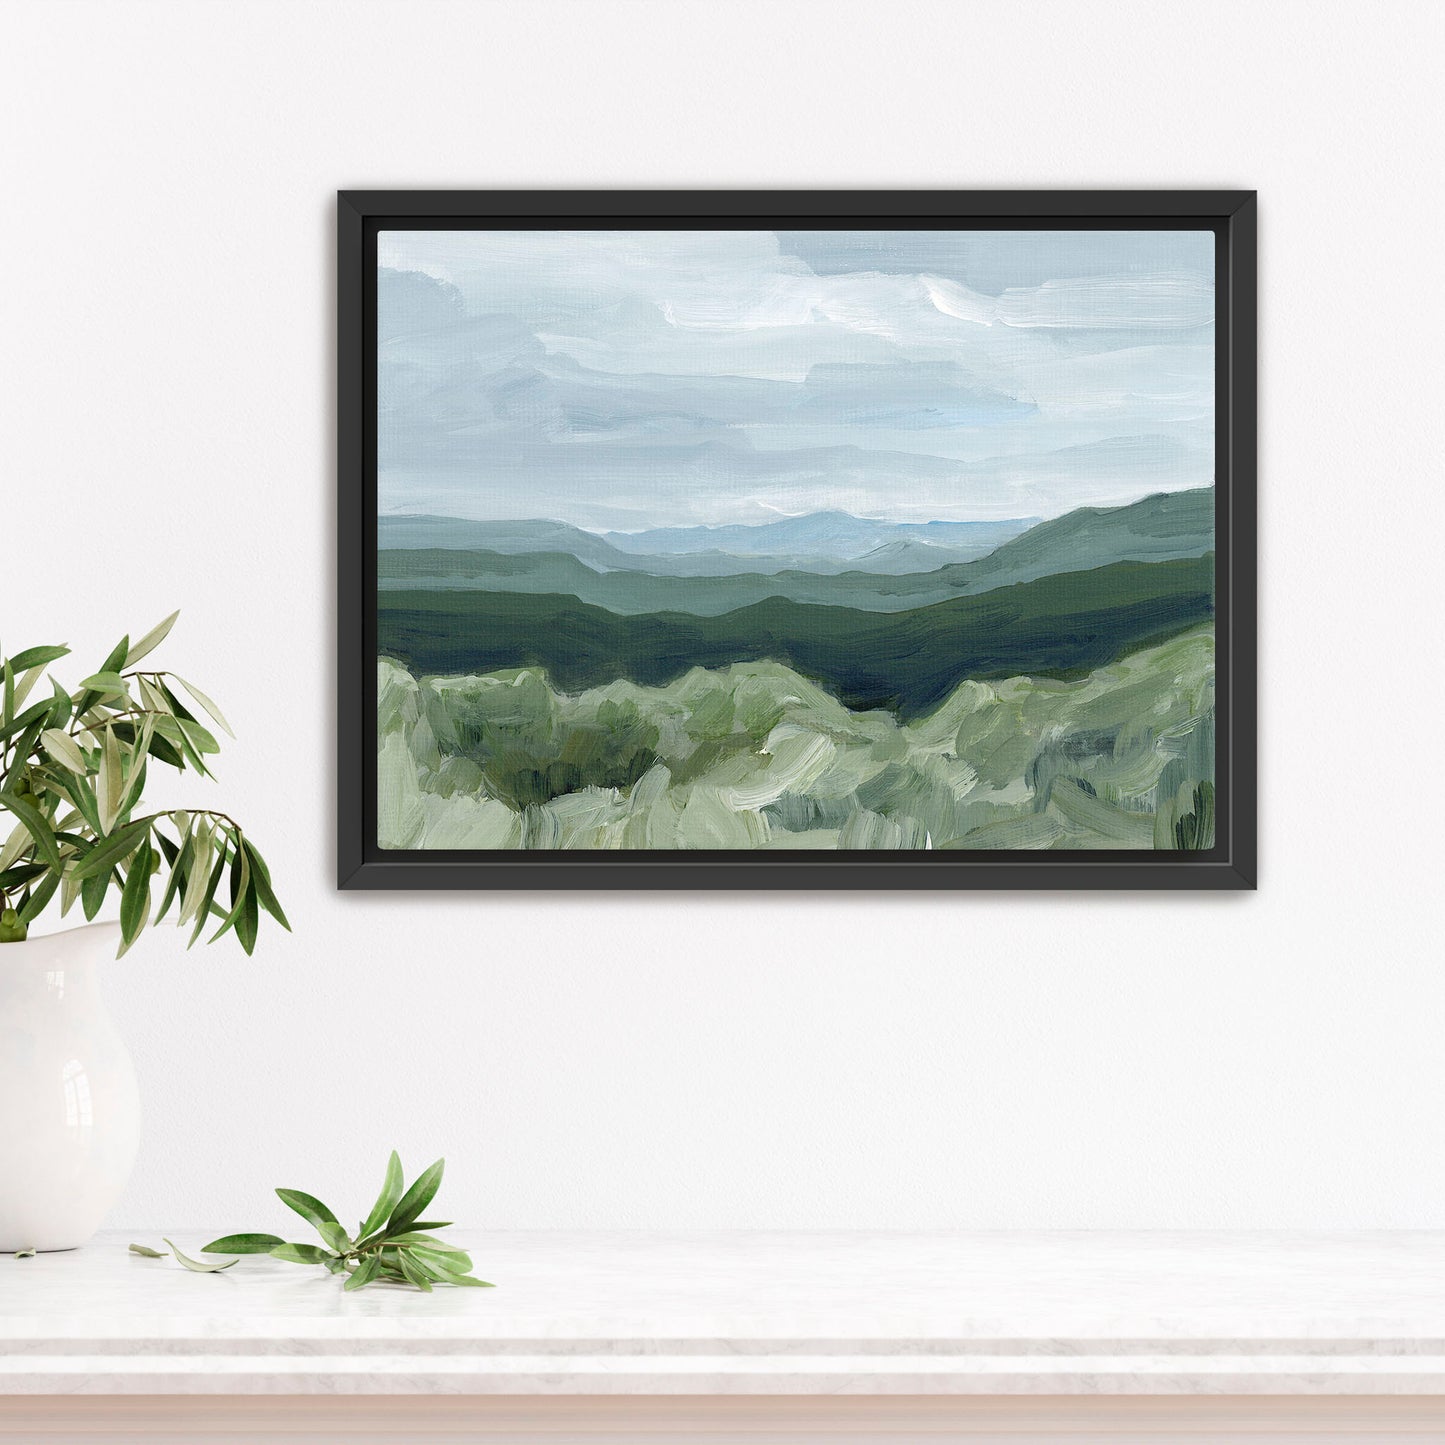 "View From Our Cabin" Art Print - Katie Garrison Art